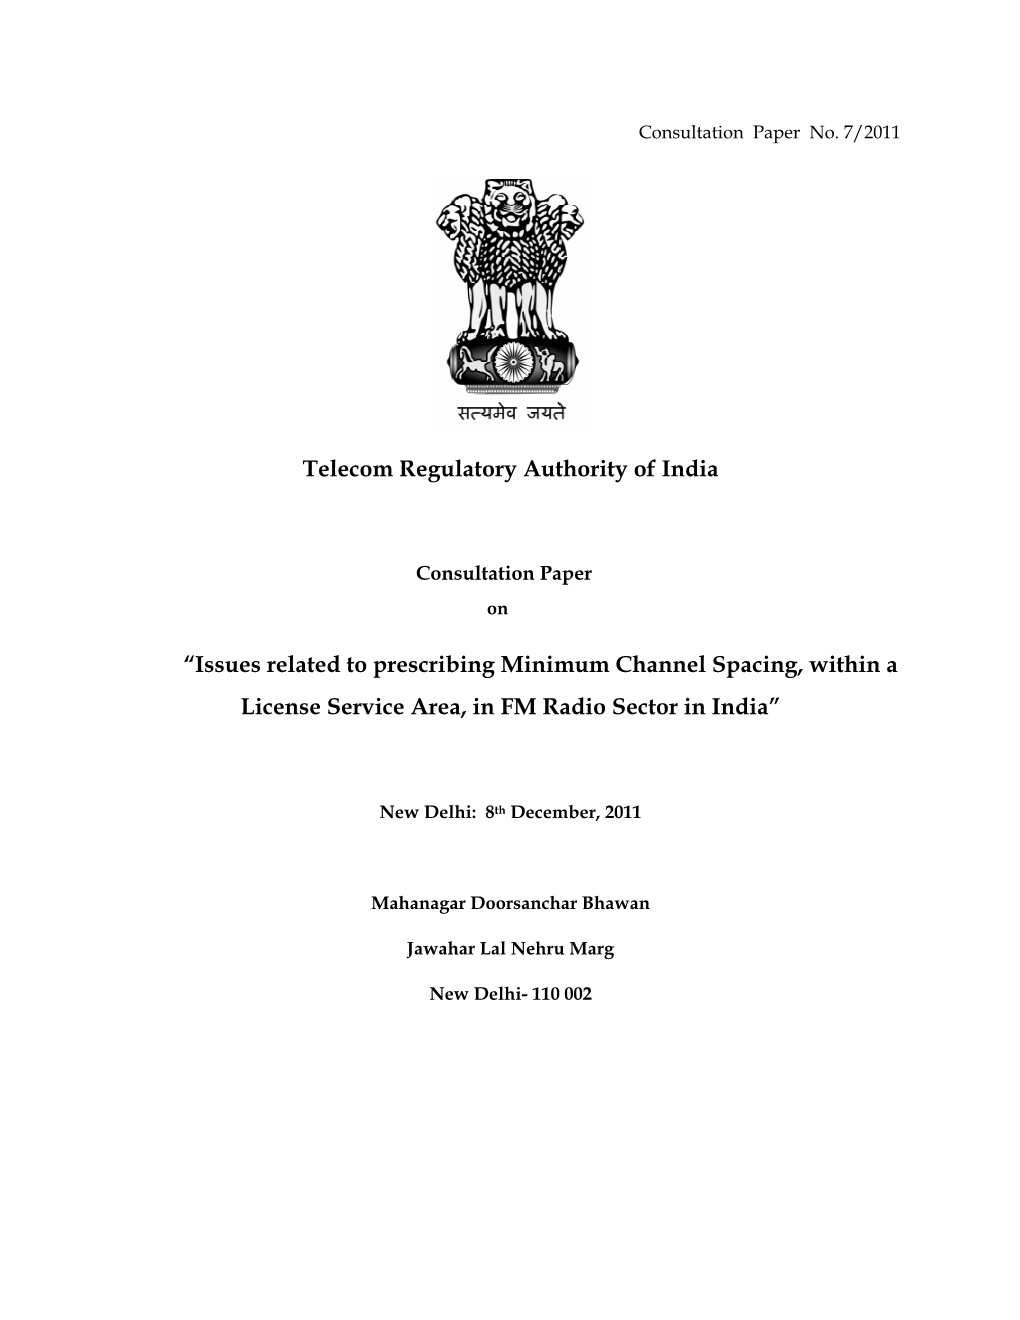 Issues Related to Prescribing Minimum Channel Spacing, Within a License Service Area, in FM Radio Sector in India”